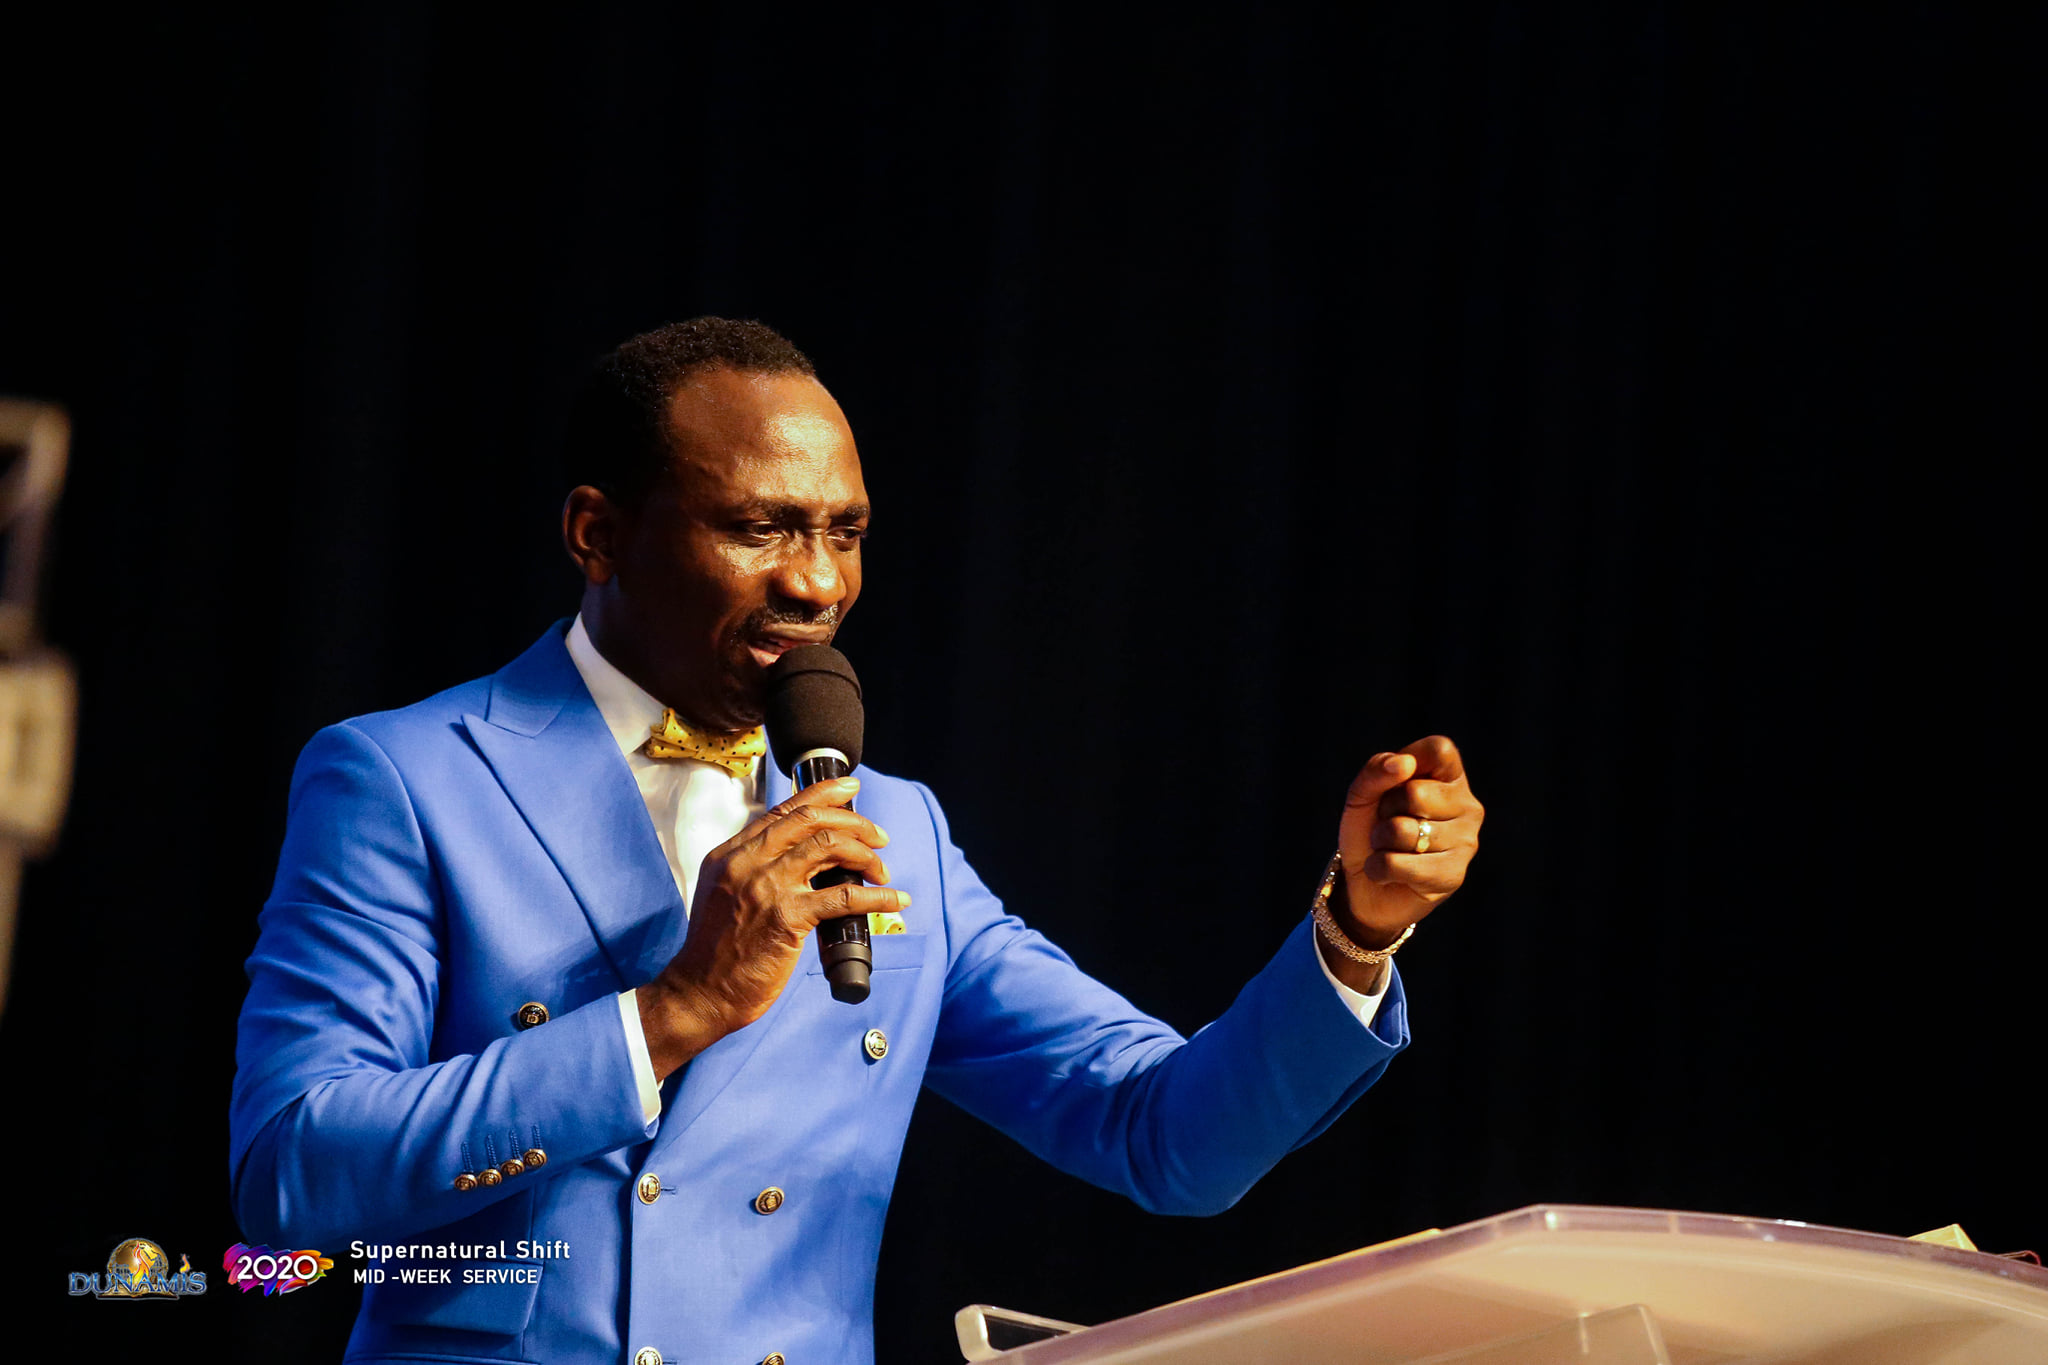 Lord I Desire Something mp3 Download by Dr Pastor Paul Enenche